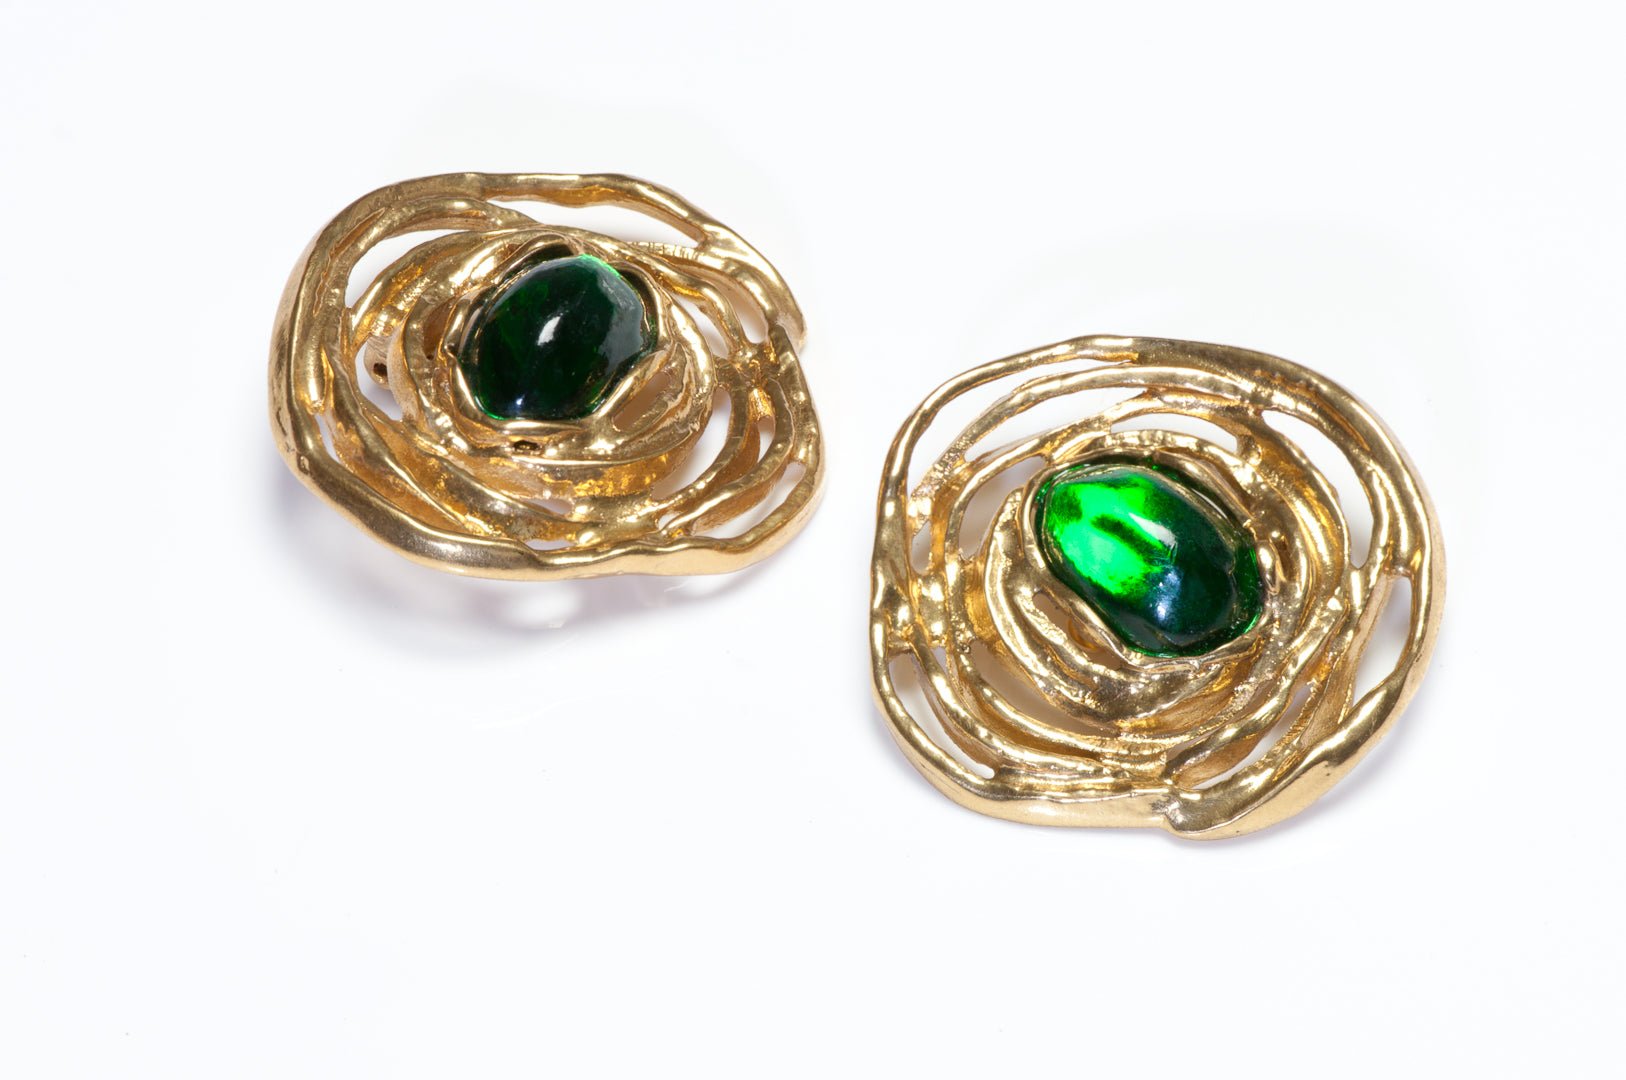 Vintage Yves Saint Laurent Large Gold Plated Green Cabochon Swirl Earrings